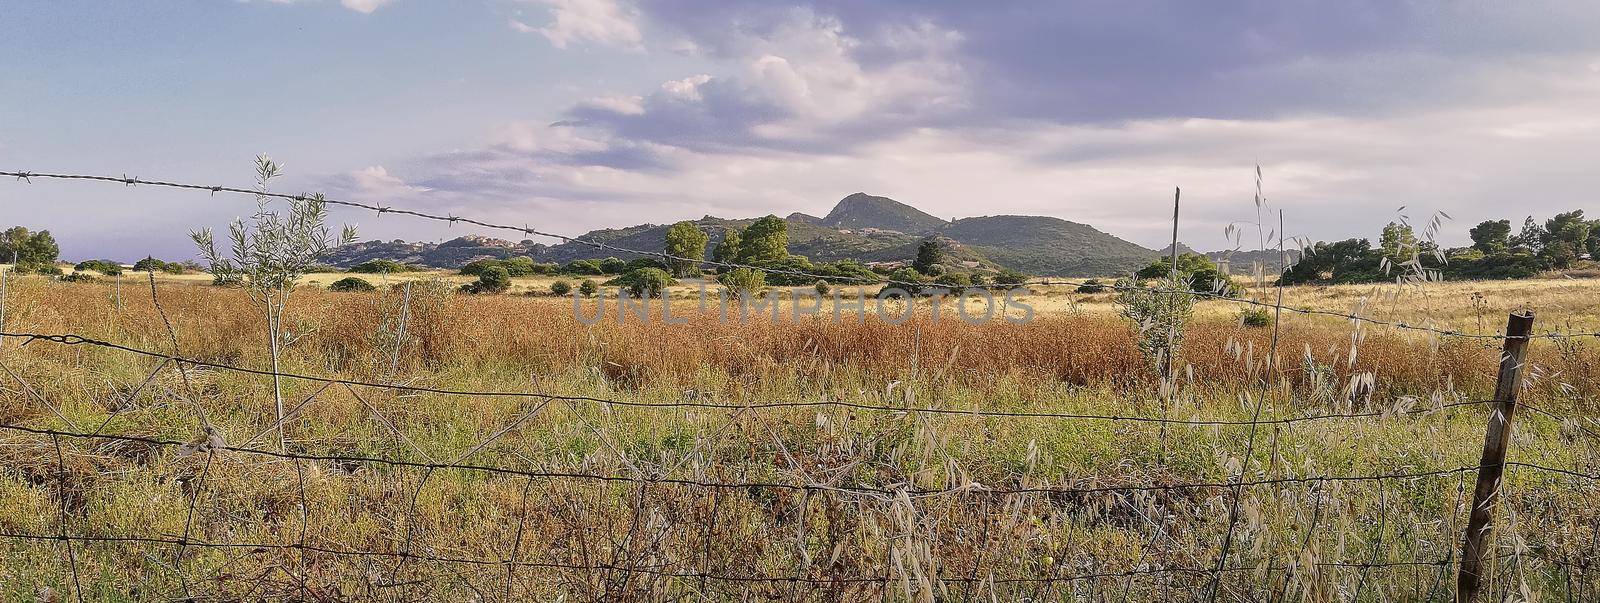 Sardinia country landscape by pippocarlot